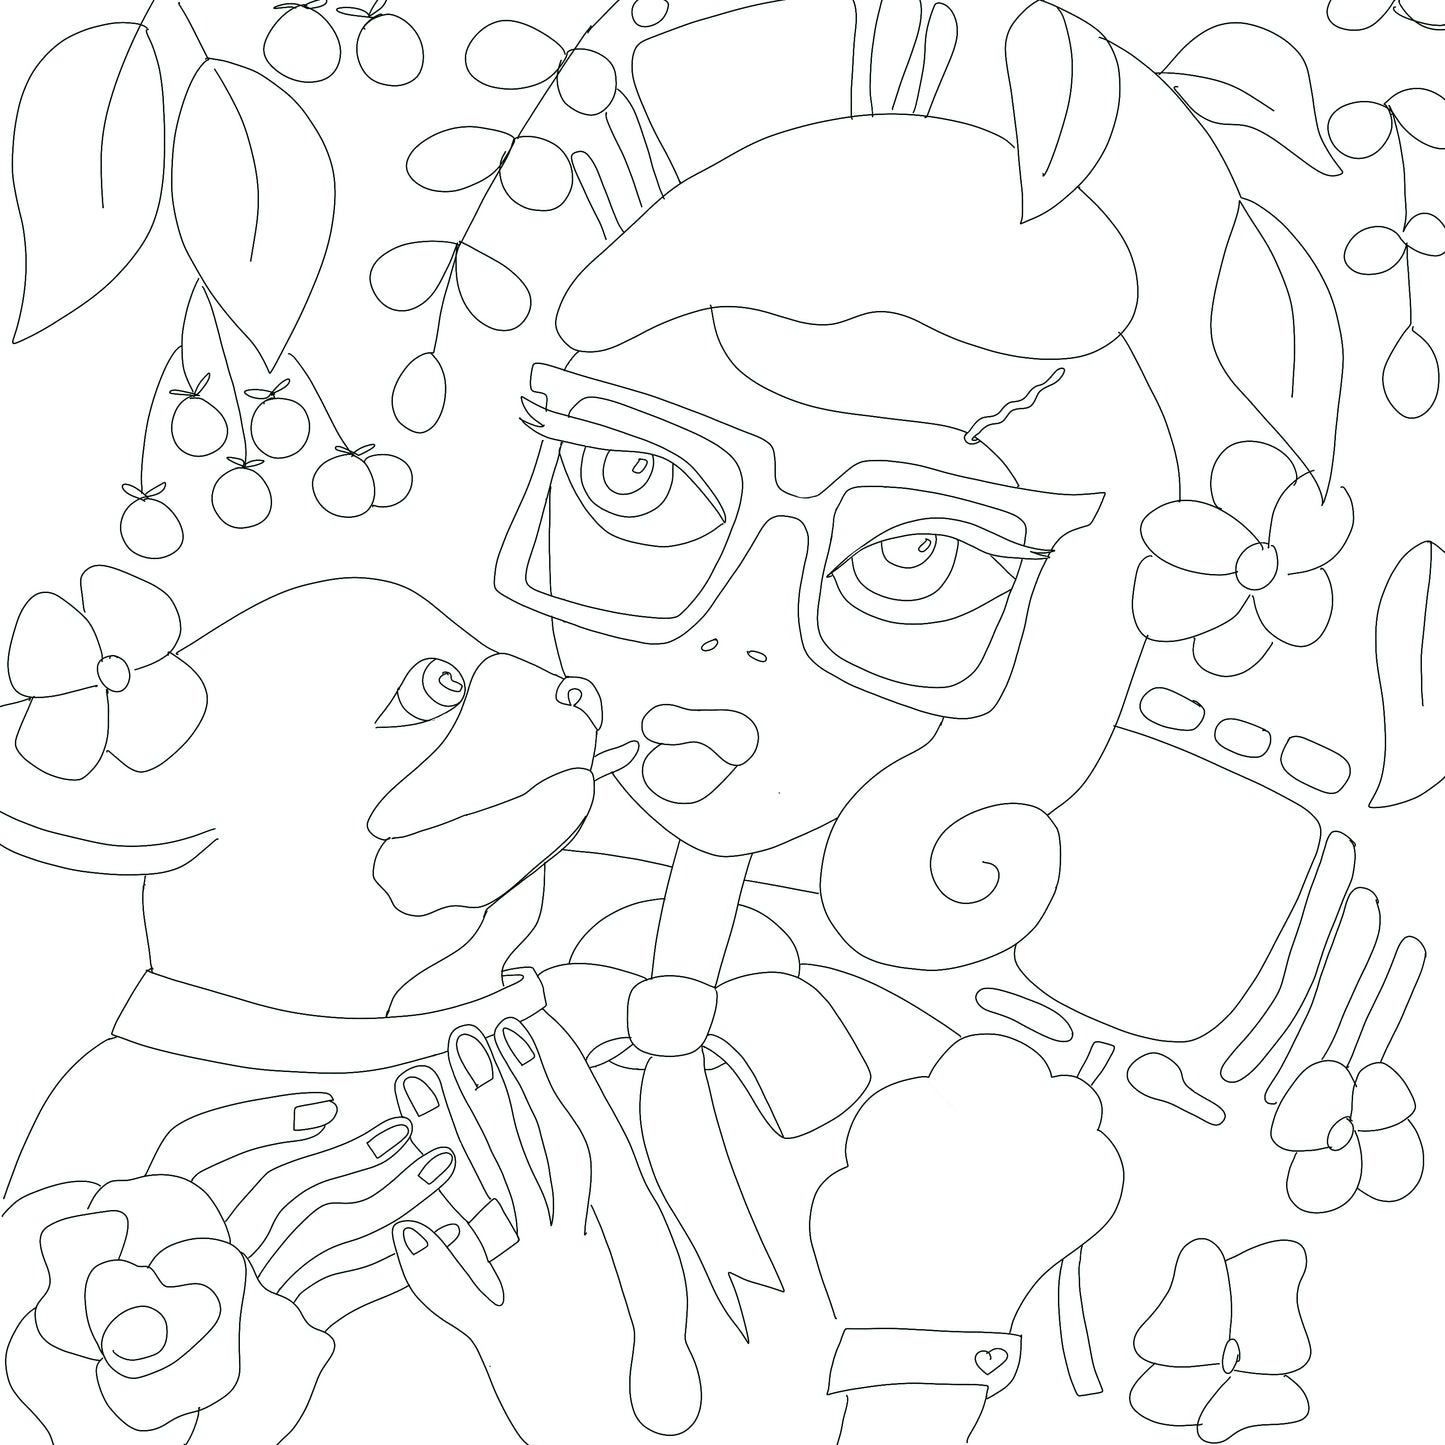 Dog Kissing Girl Digital Coloring Page for ProCreate